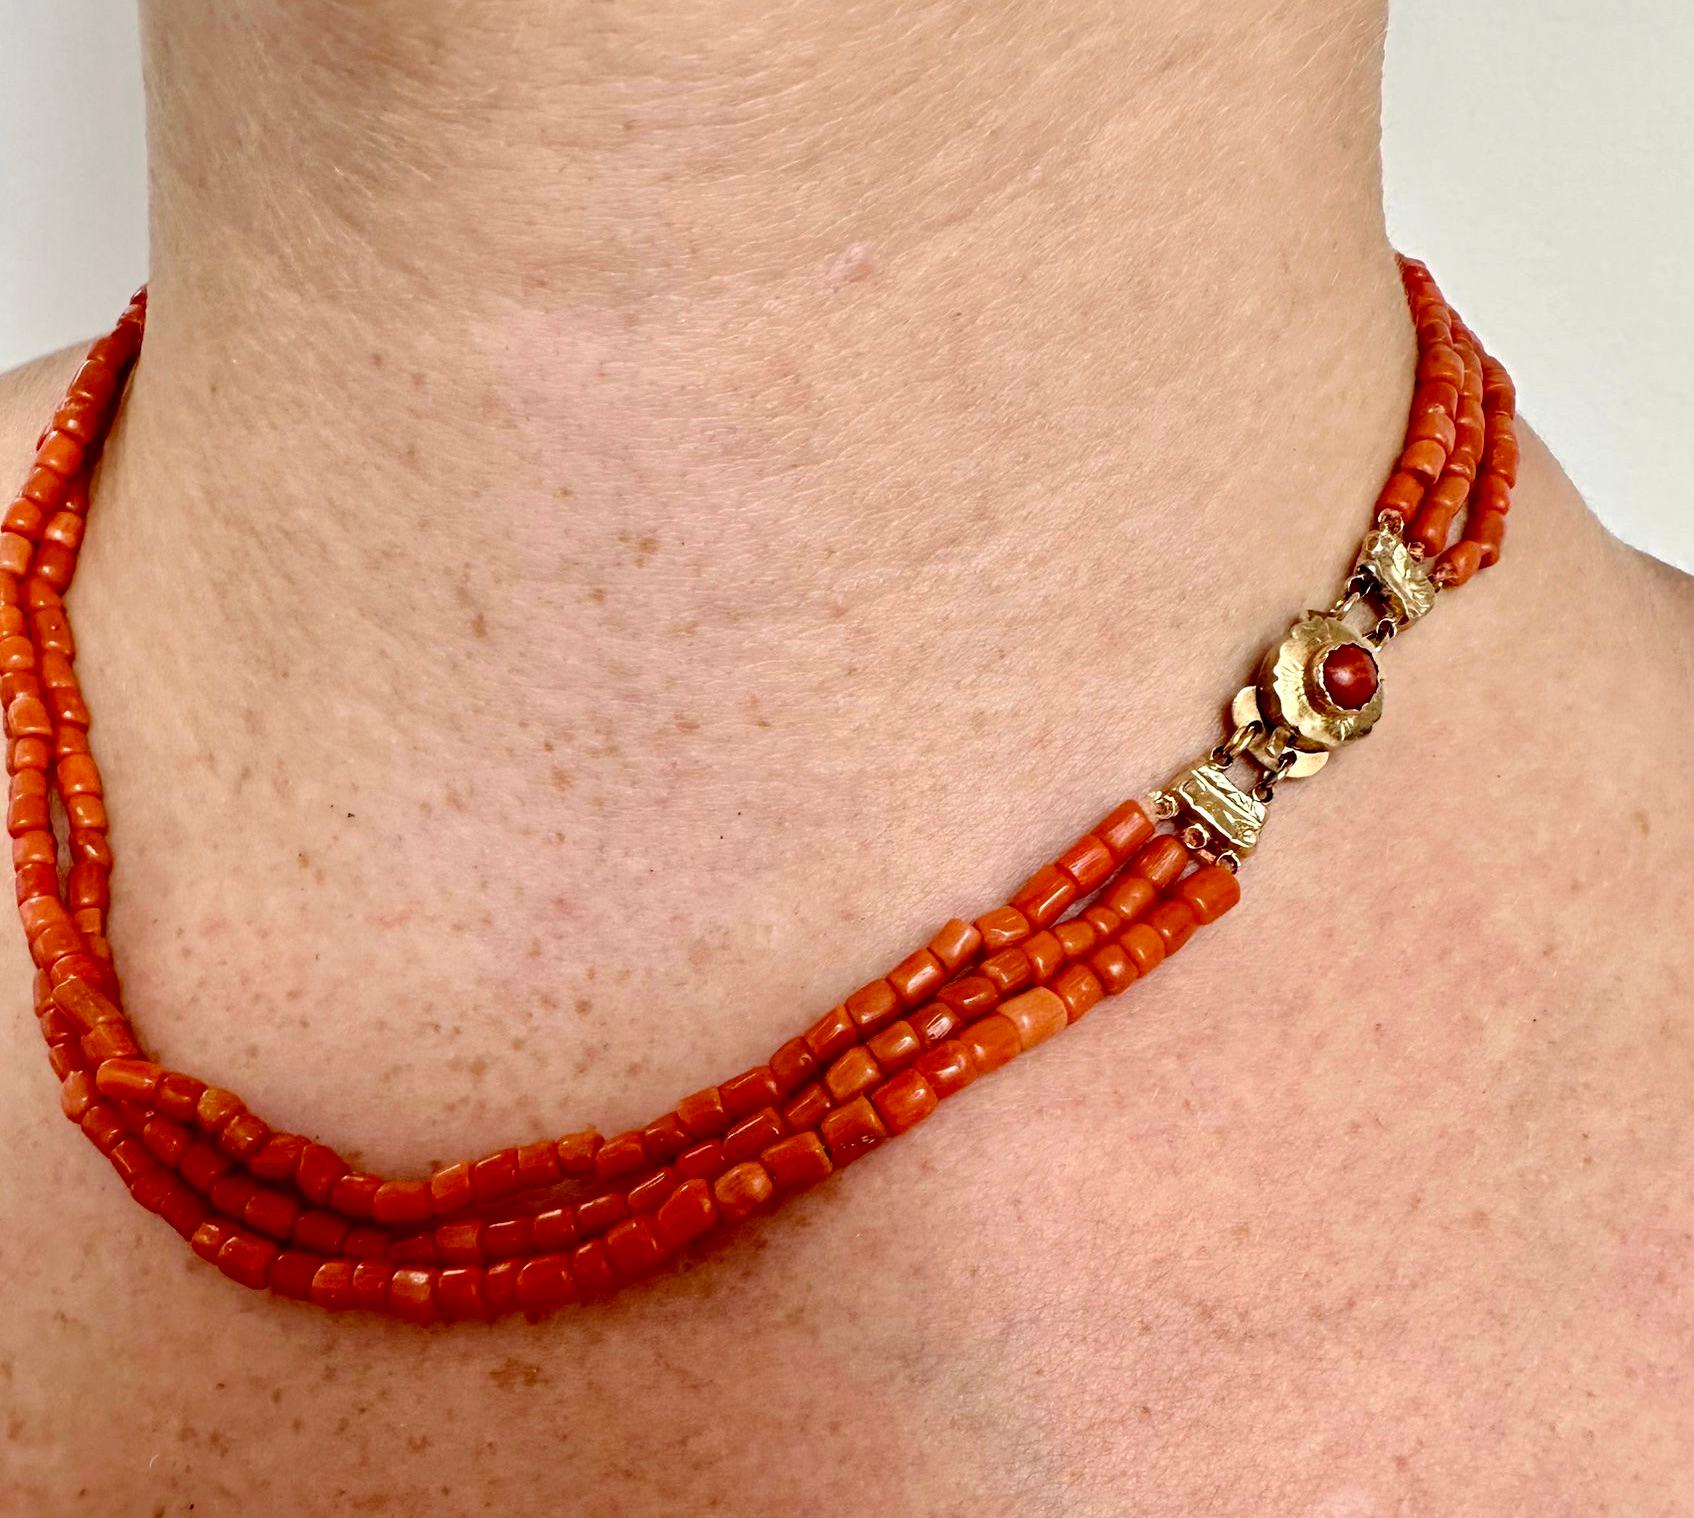 
A three strand of fine European natural red/salmon coral necklace beads about 3-4 mm. The coral beads are barrel-shaped and the handmade clasp is made of 14k yellow gold. The gold clasp is decorated with a small round coral. Very good condition.